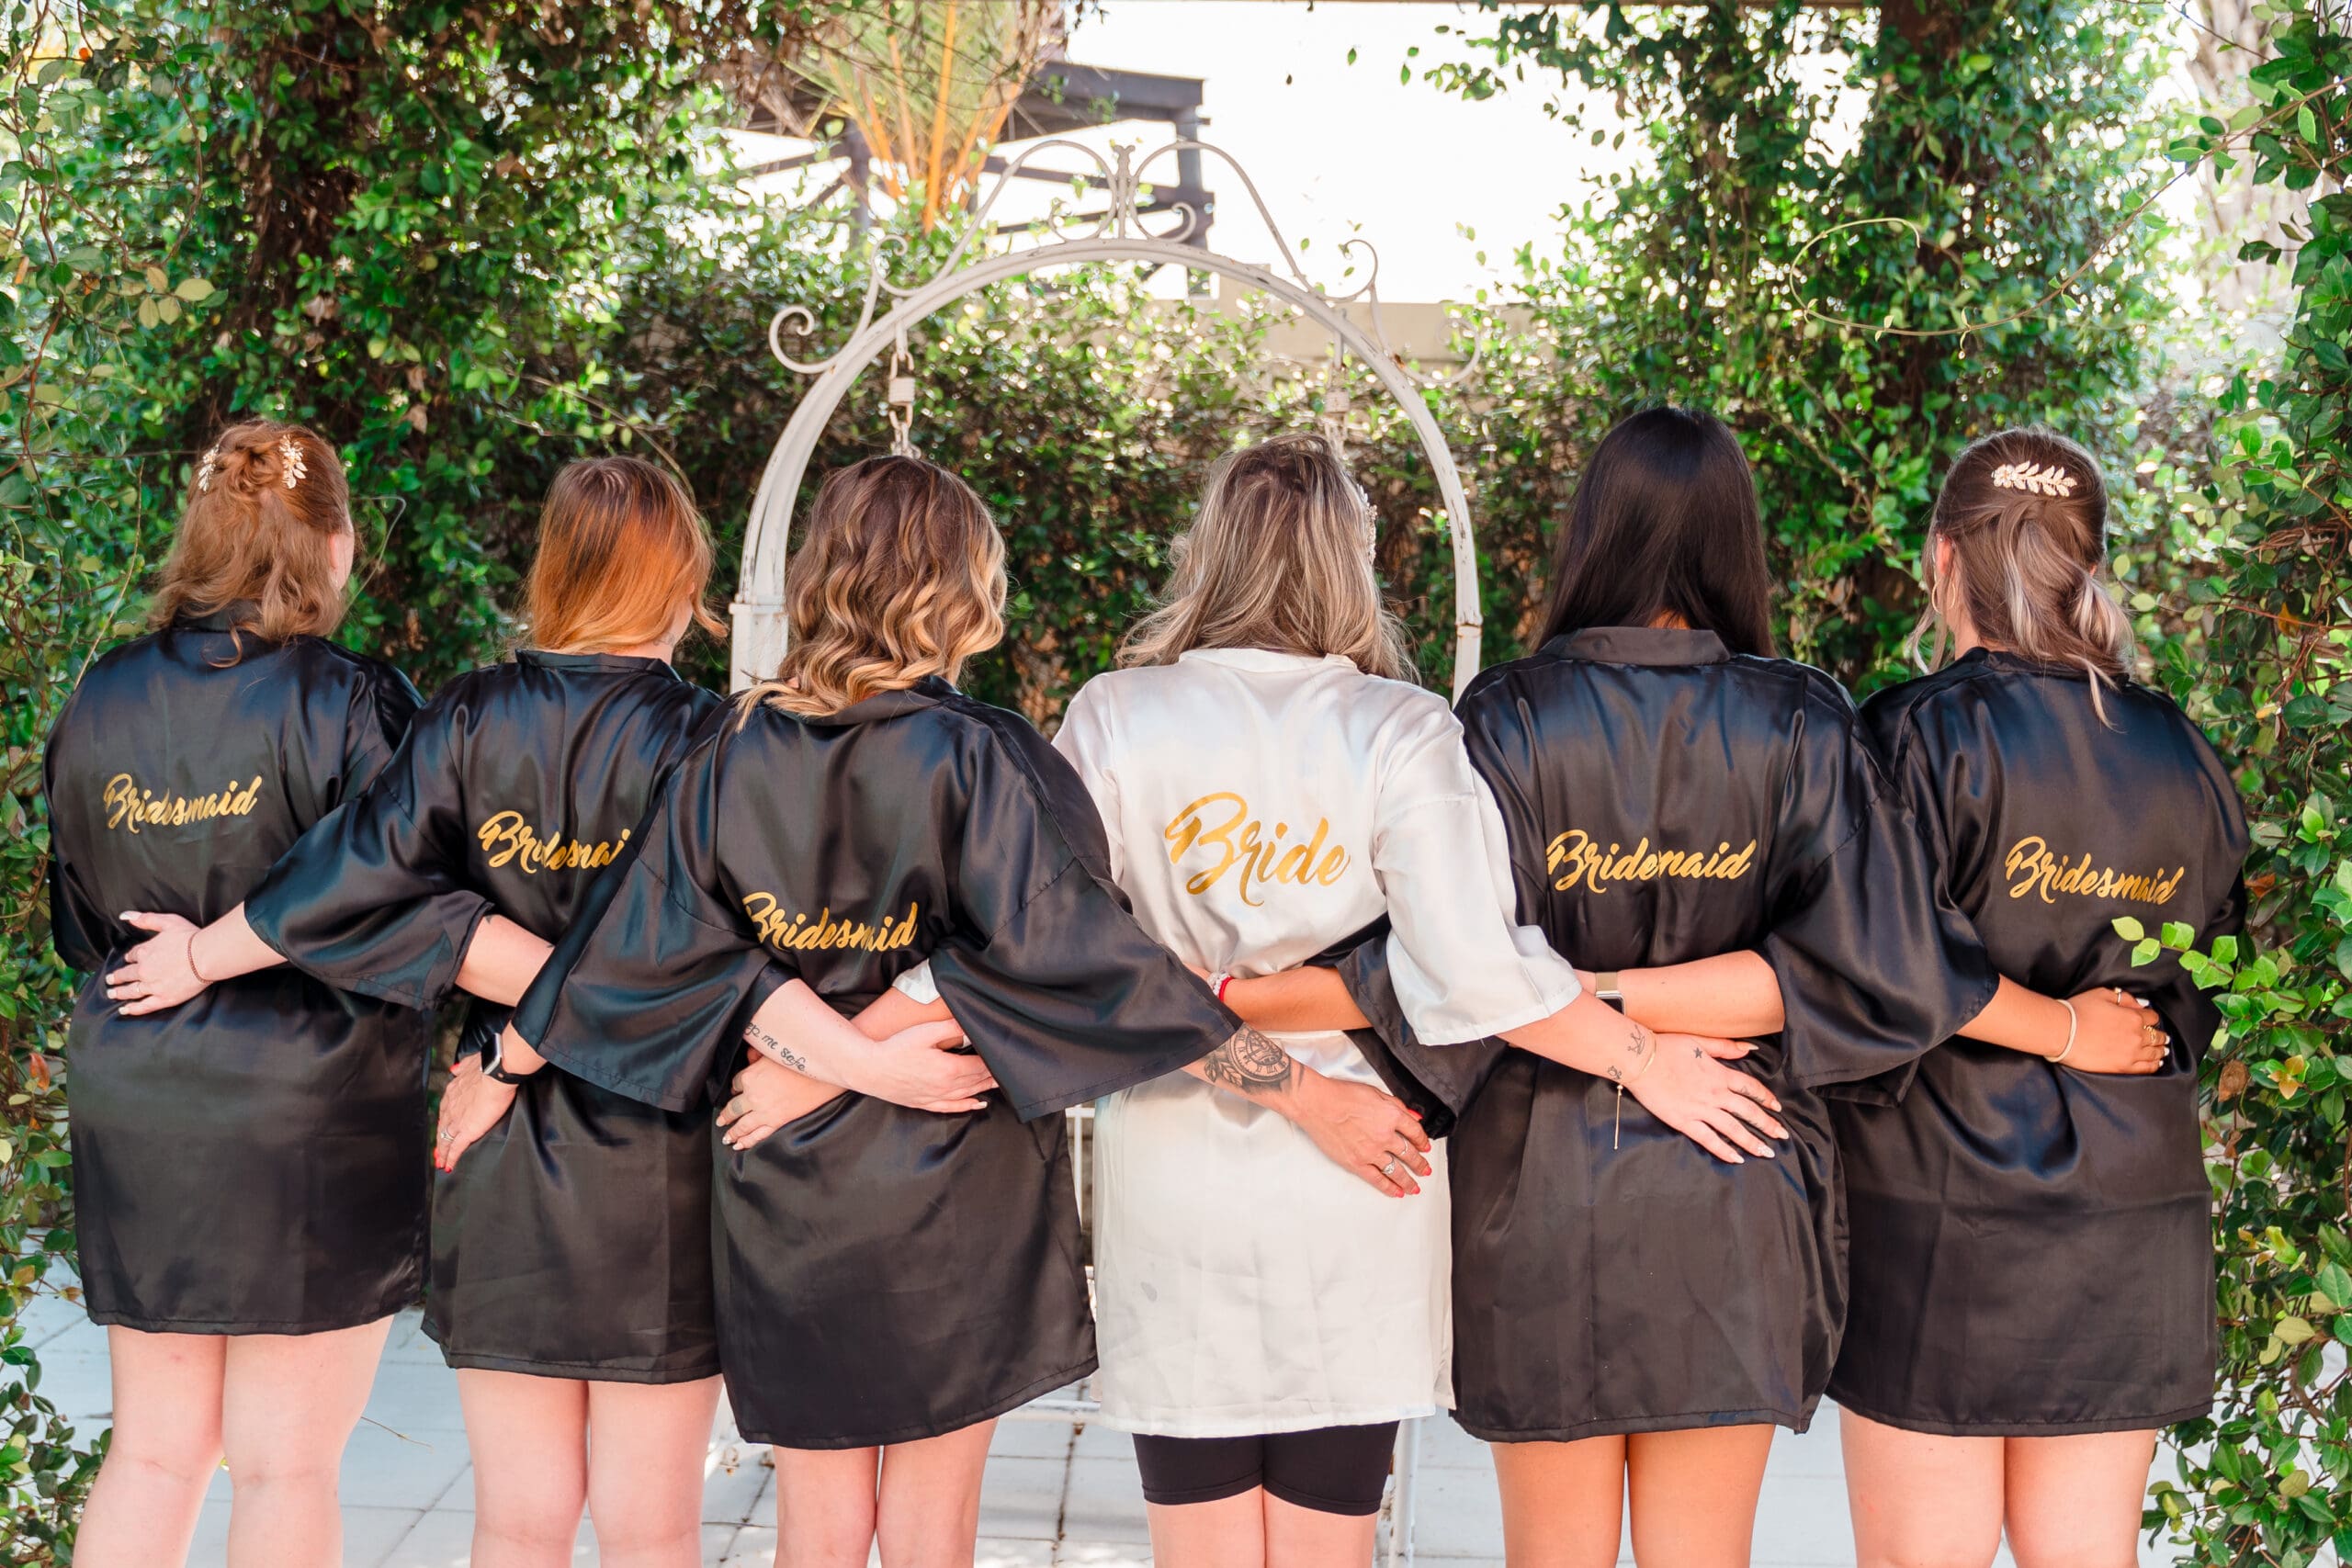 Taylor and her bridesmaids wearing labeled robes, Taylor's robe is white with "Bride" in gold, others in black with "Bridesmaid" in gold, arms intertwined, facing away from the camera